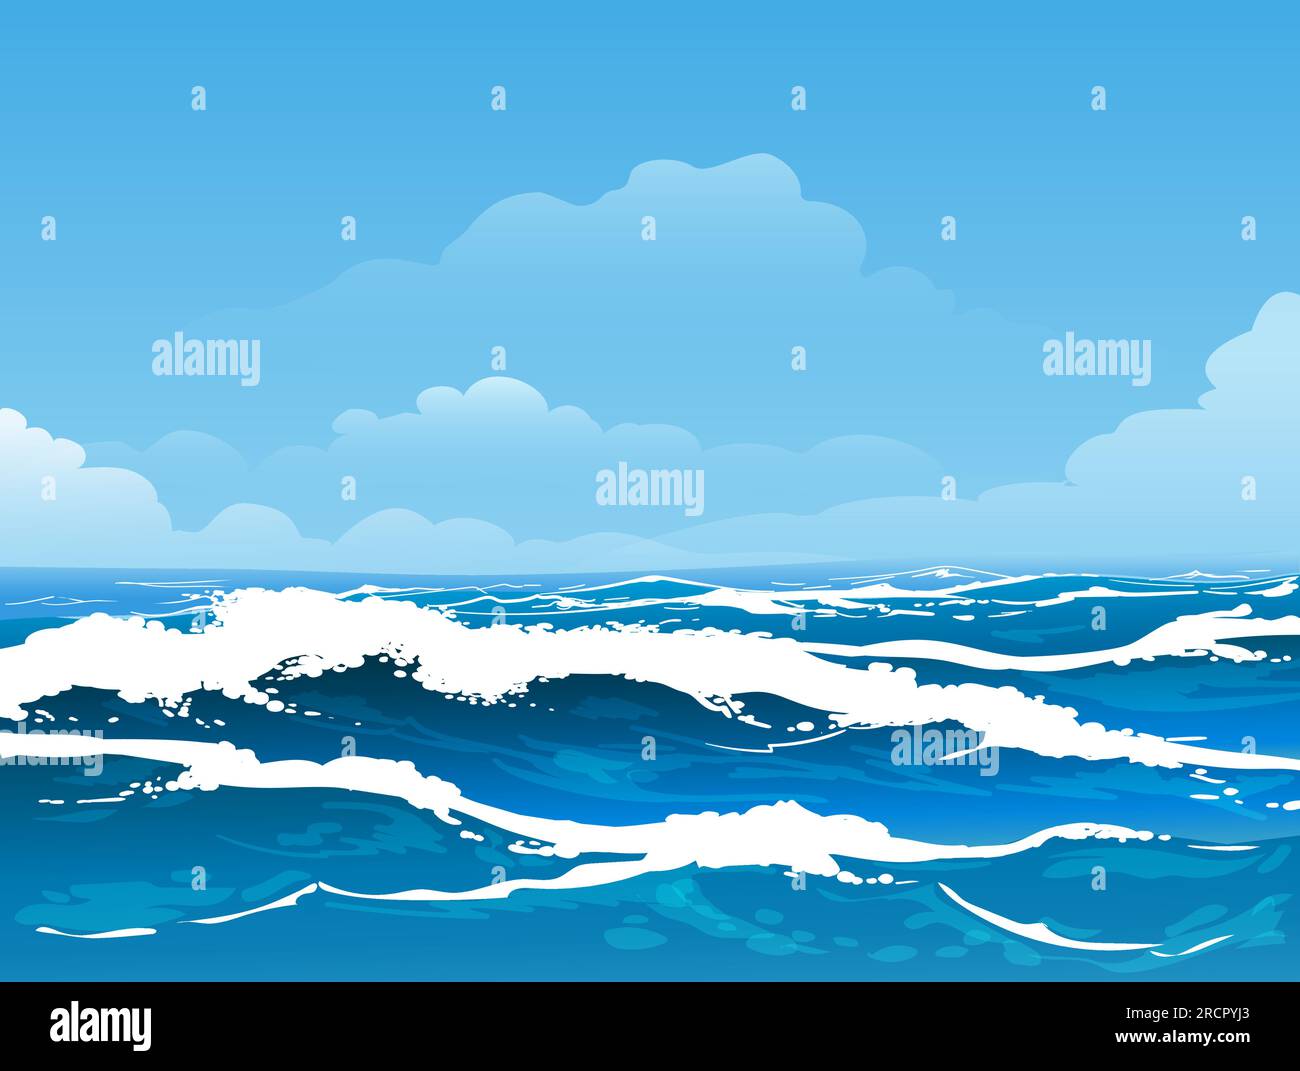 Seascape background with summer Sea Surface, Waves, Sky and White Clouds. Vector illustration Stock Vector